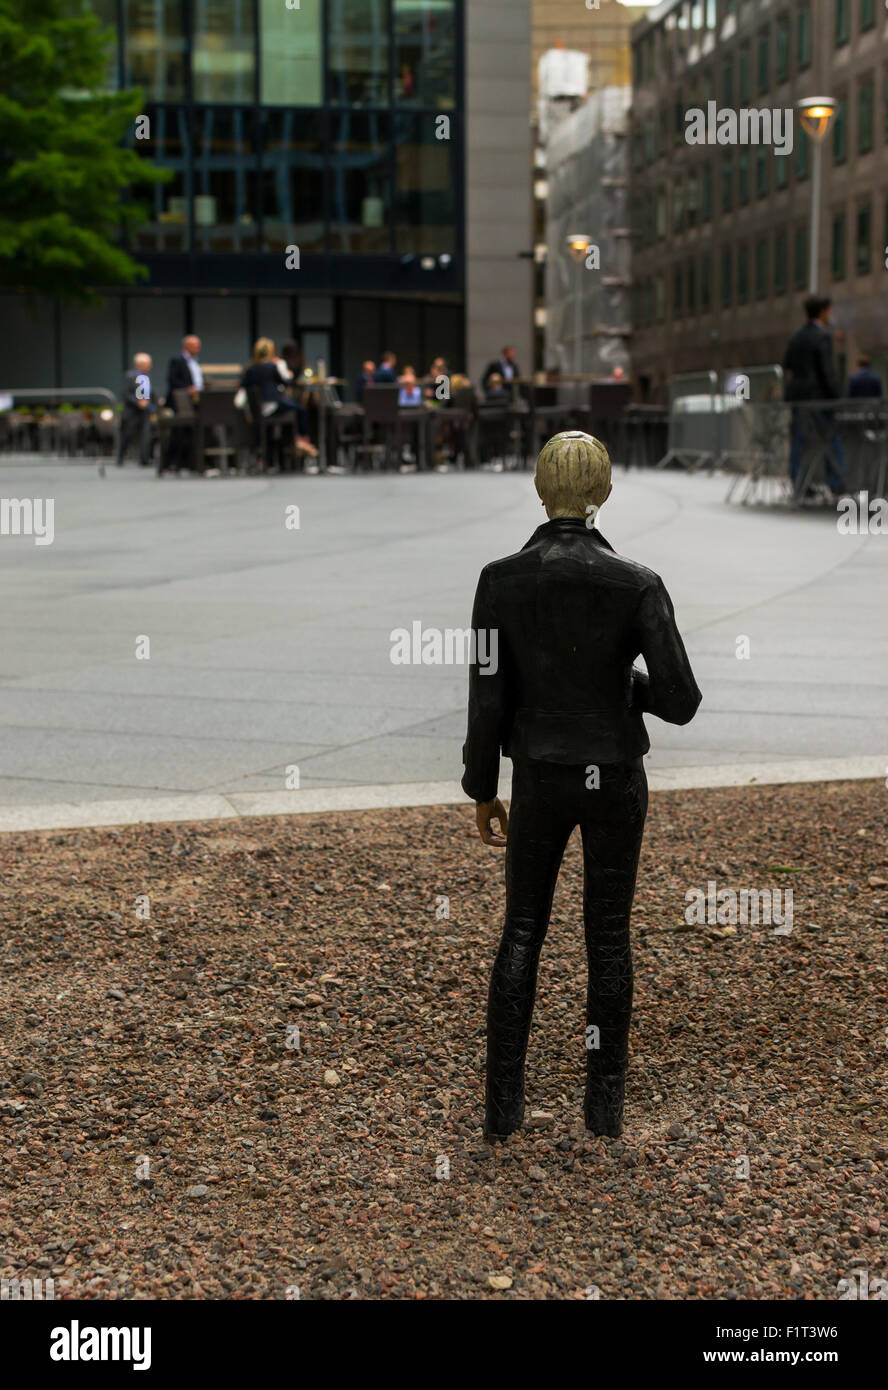 August 18th 2015 - Miniature human figure looks at city workers as part of an Art installation by Japanese artist Tomoaki Suzuki Stock Photo